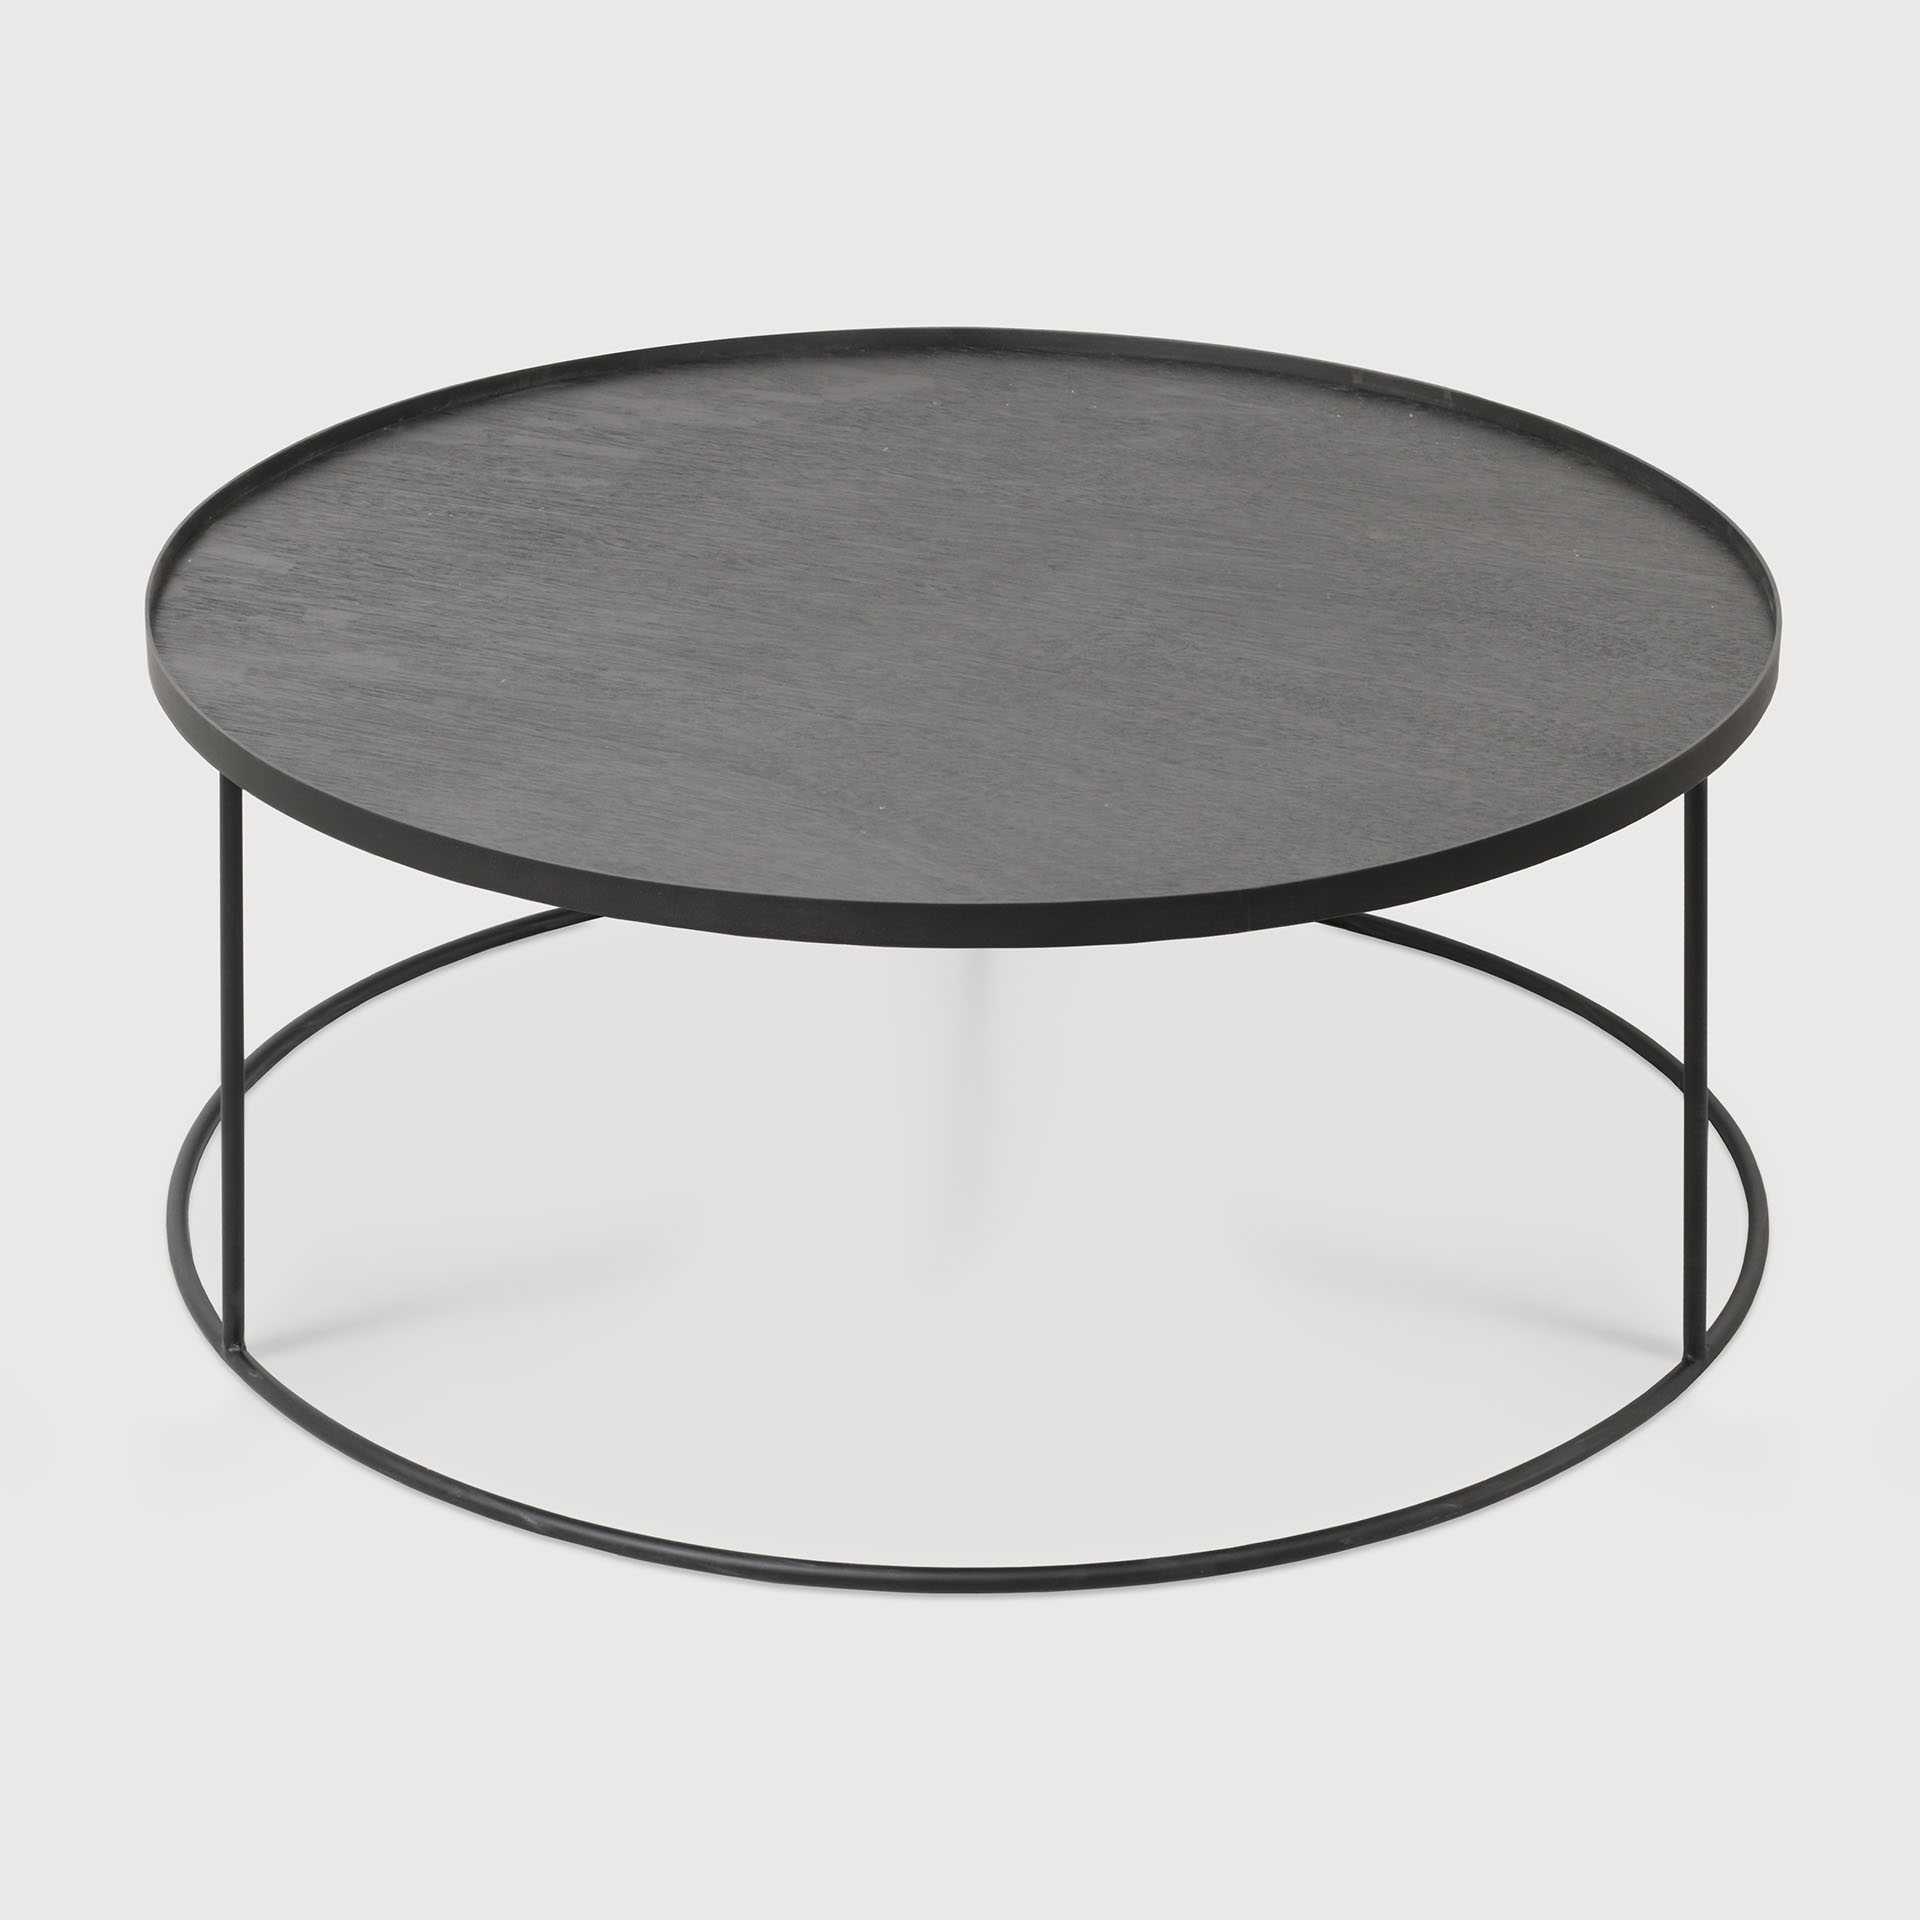 [20328*] Round tray coffee table